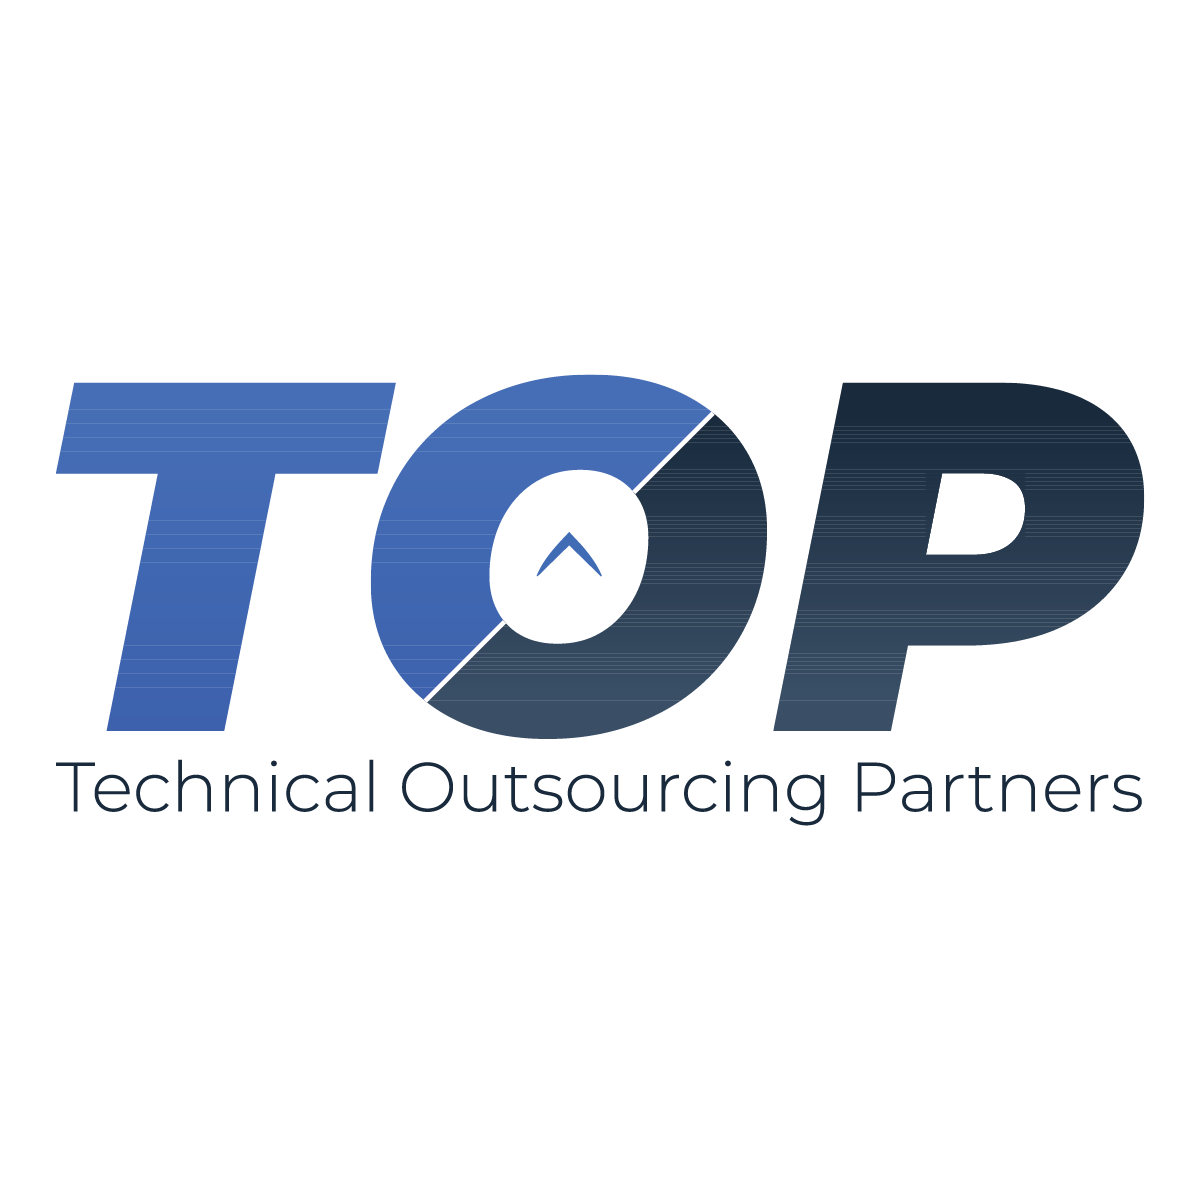 Technical Outsourcing Partners